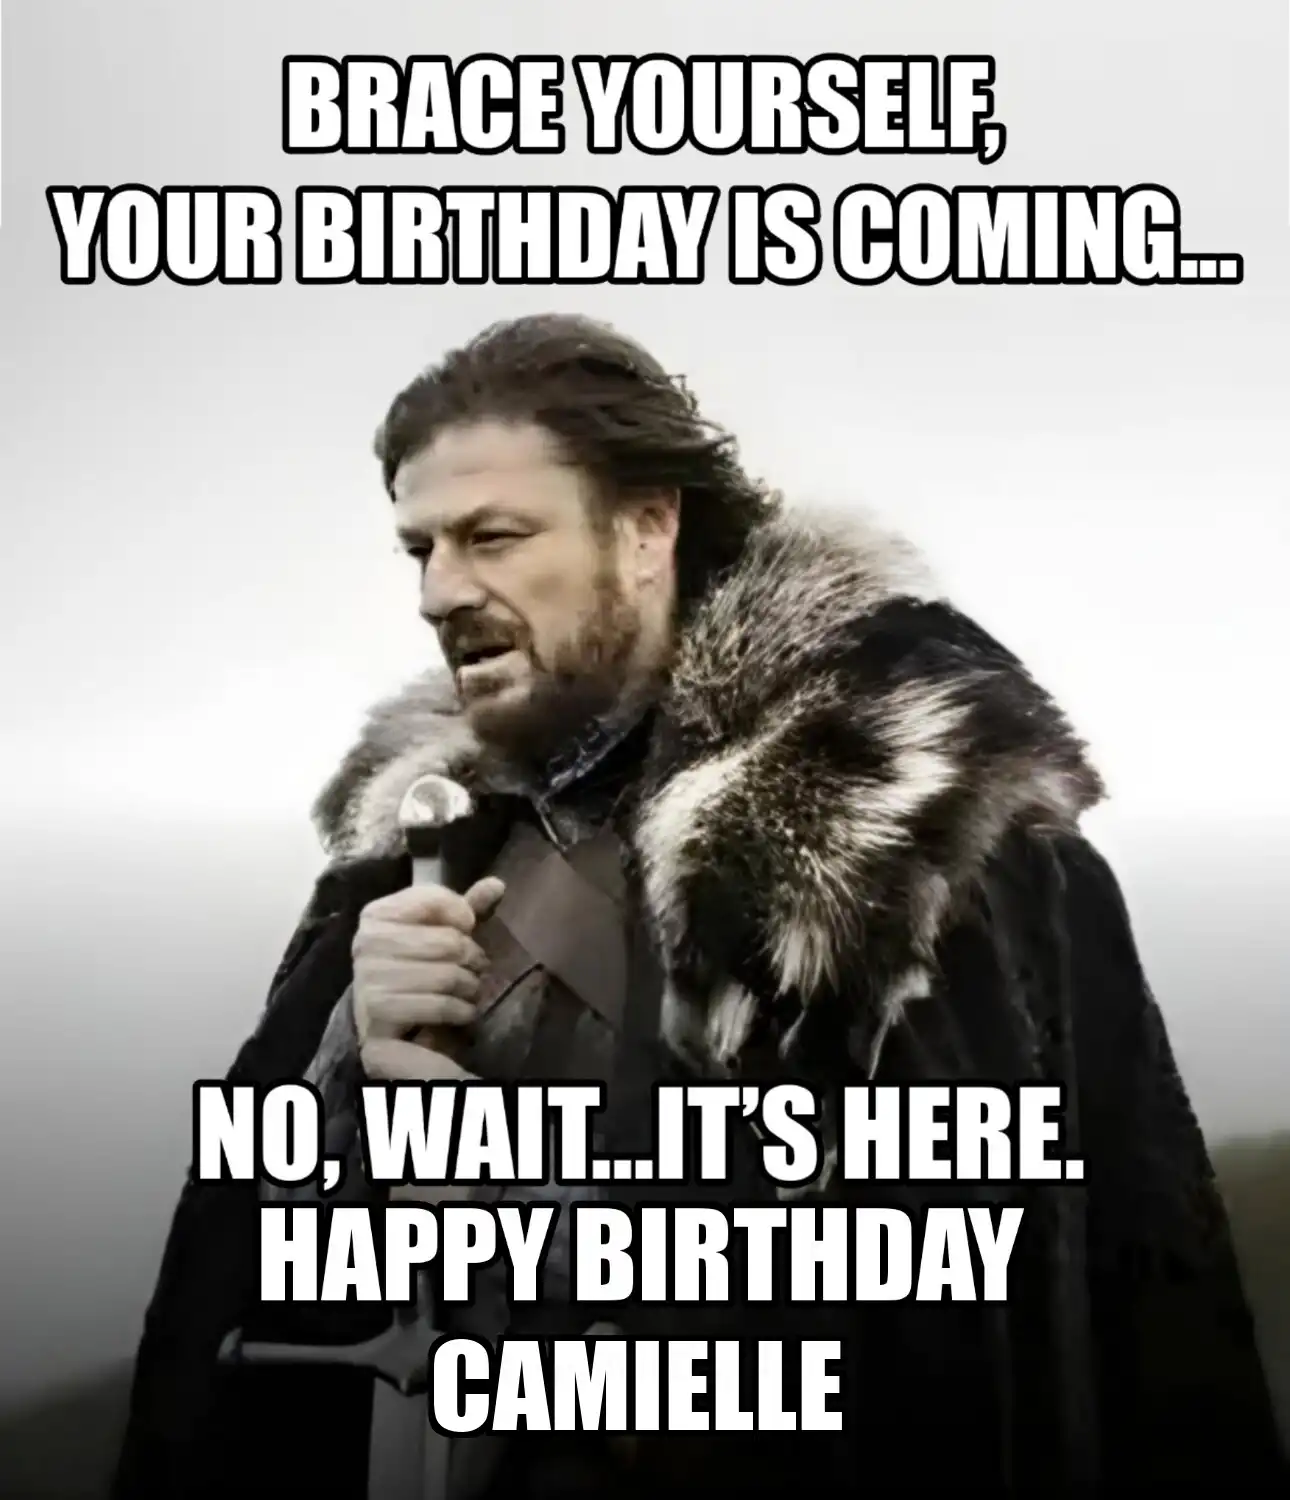 Happy Birthday Camielle Brace Yourself Your Birthday Is Coming Meme